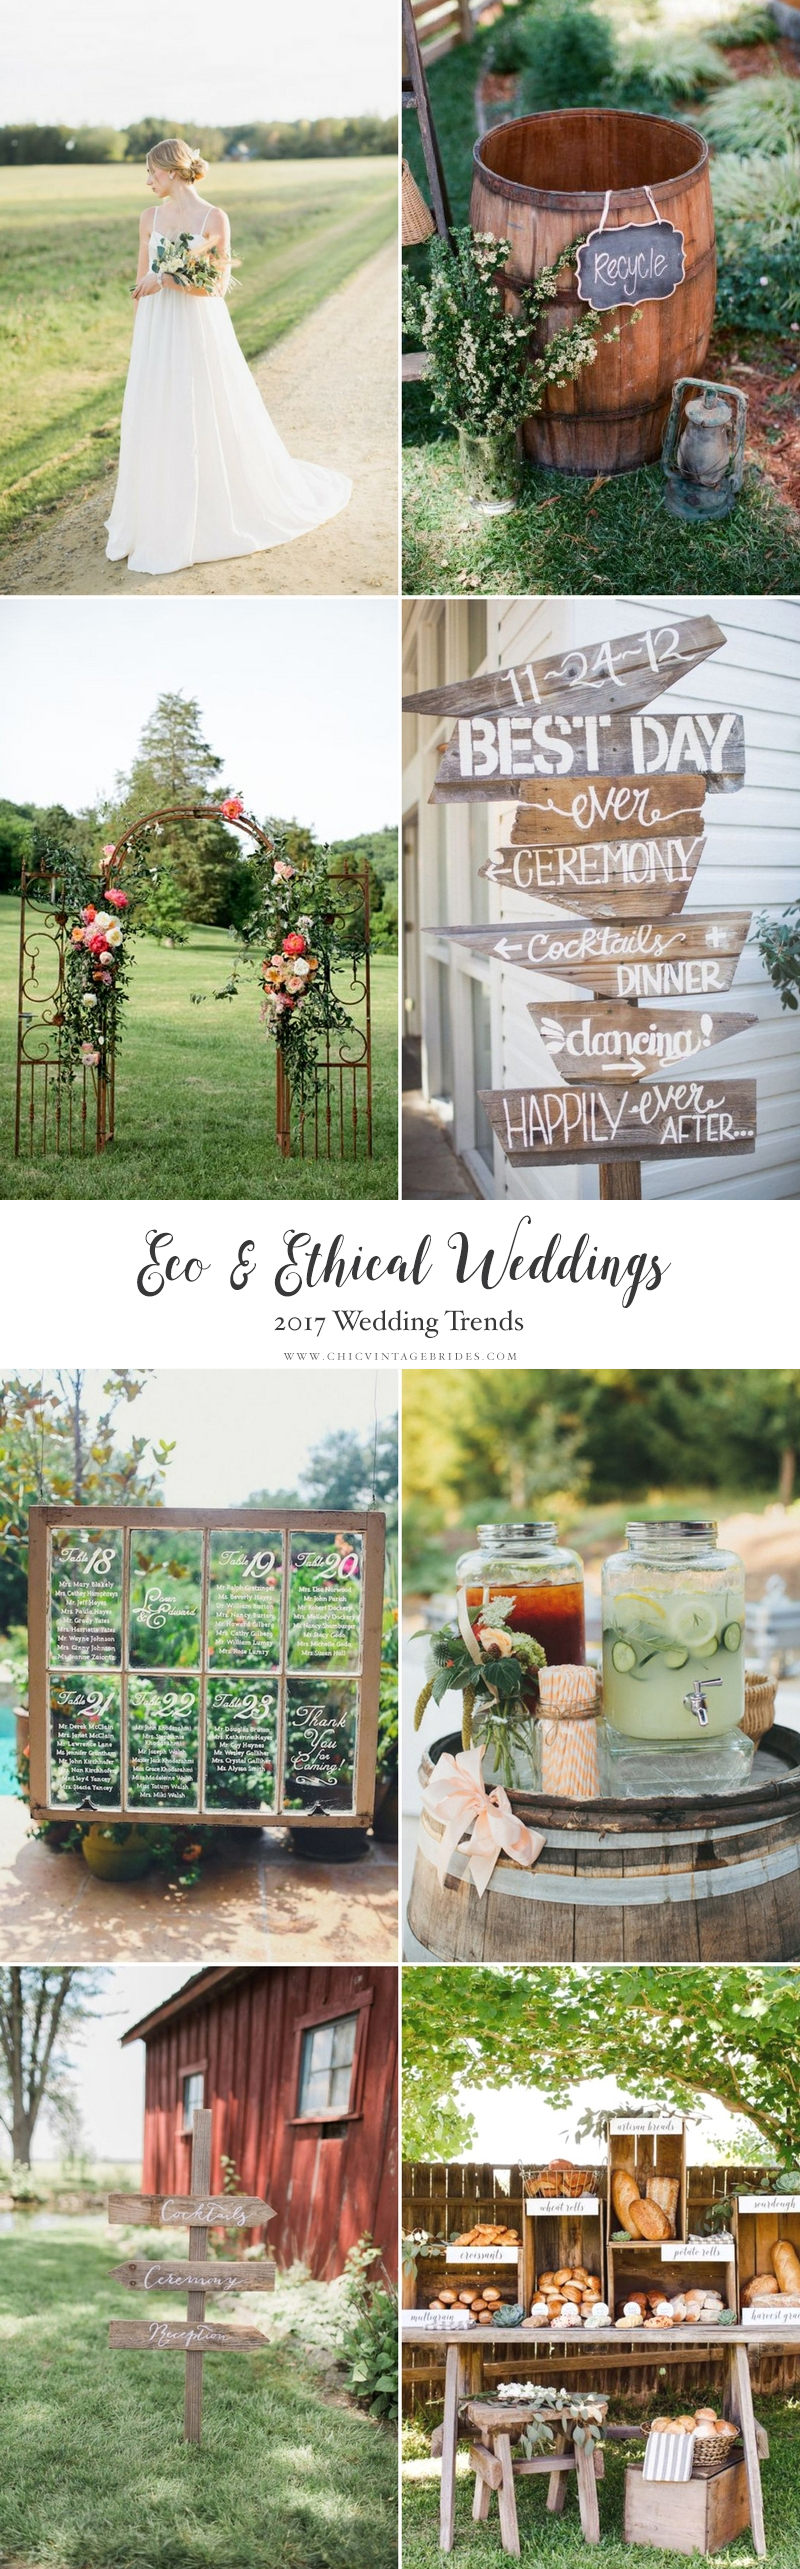 Top Wedding Trends 2017 - Eco & Ethical